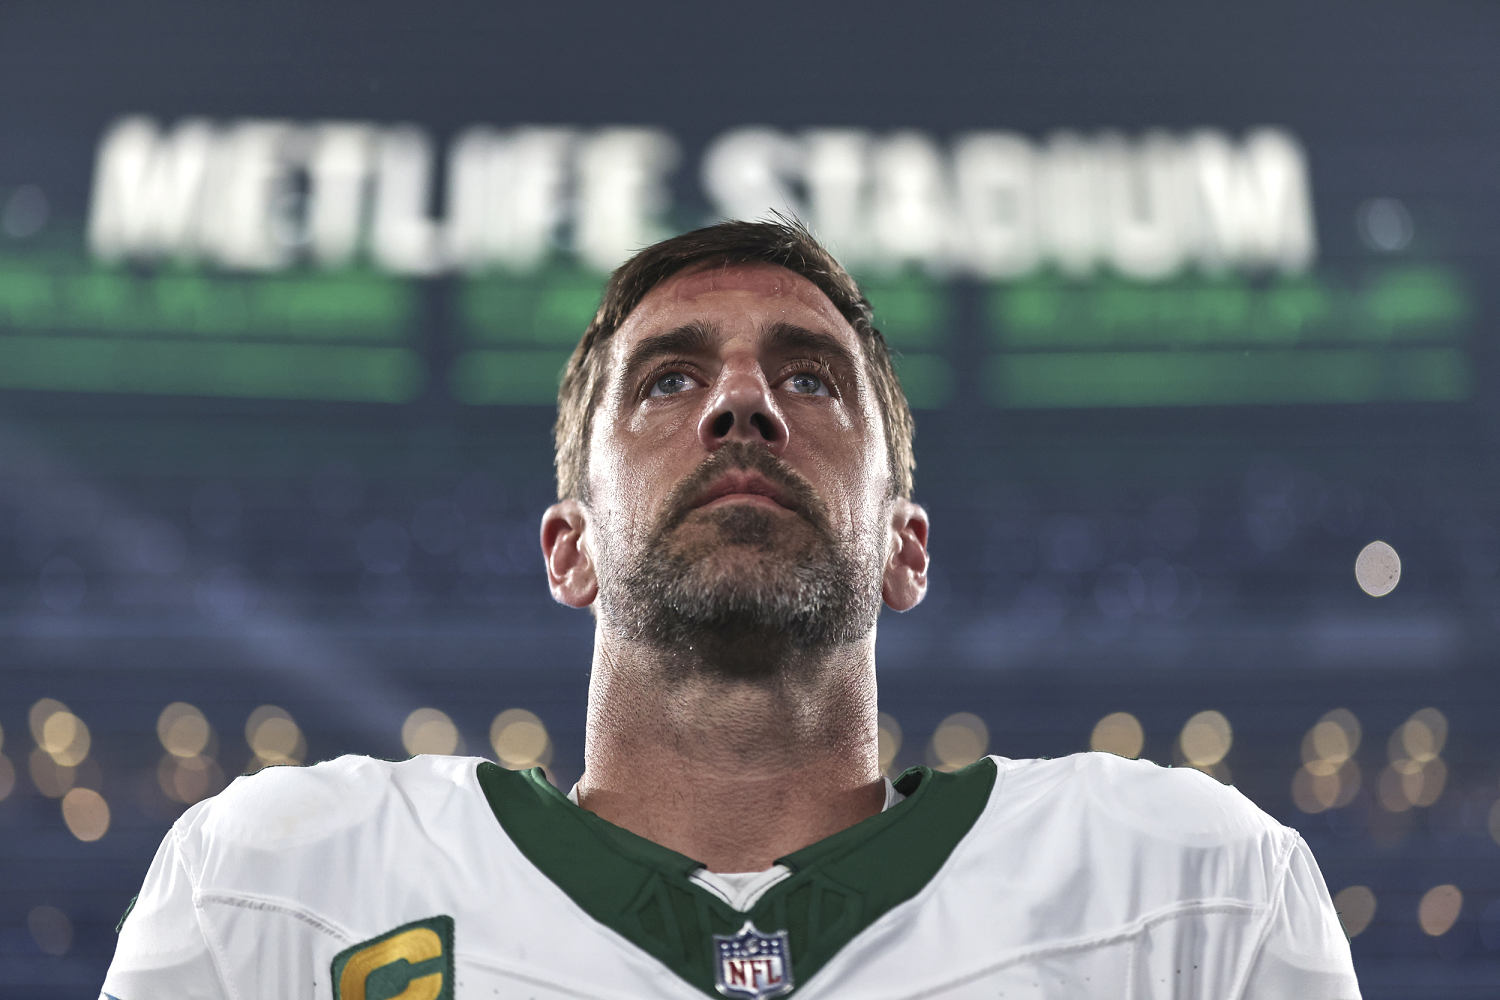 Aaron Rodgers' wild ride: From draft day snub to all-time NFL great to Jimmy Kimmel spat 